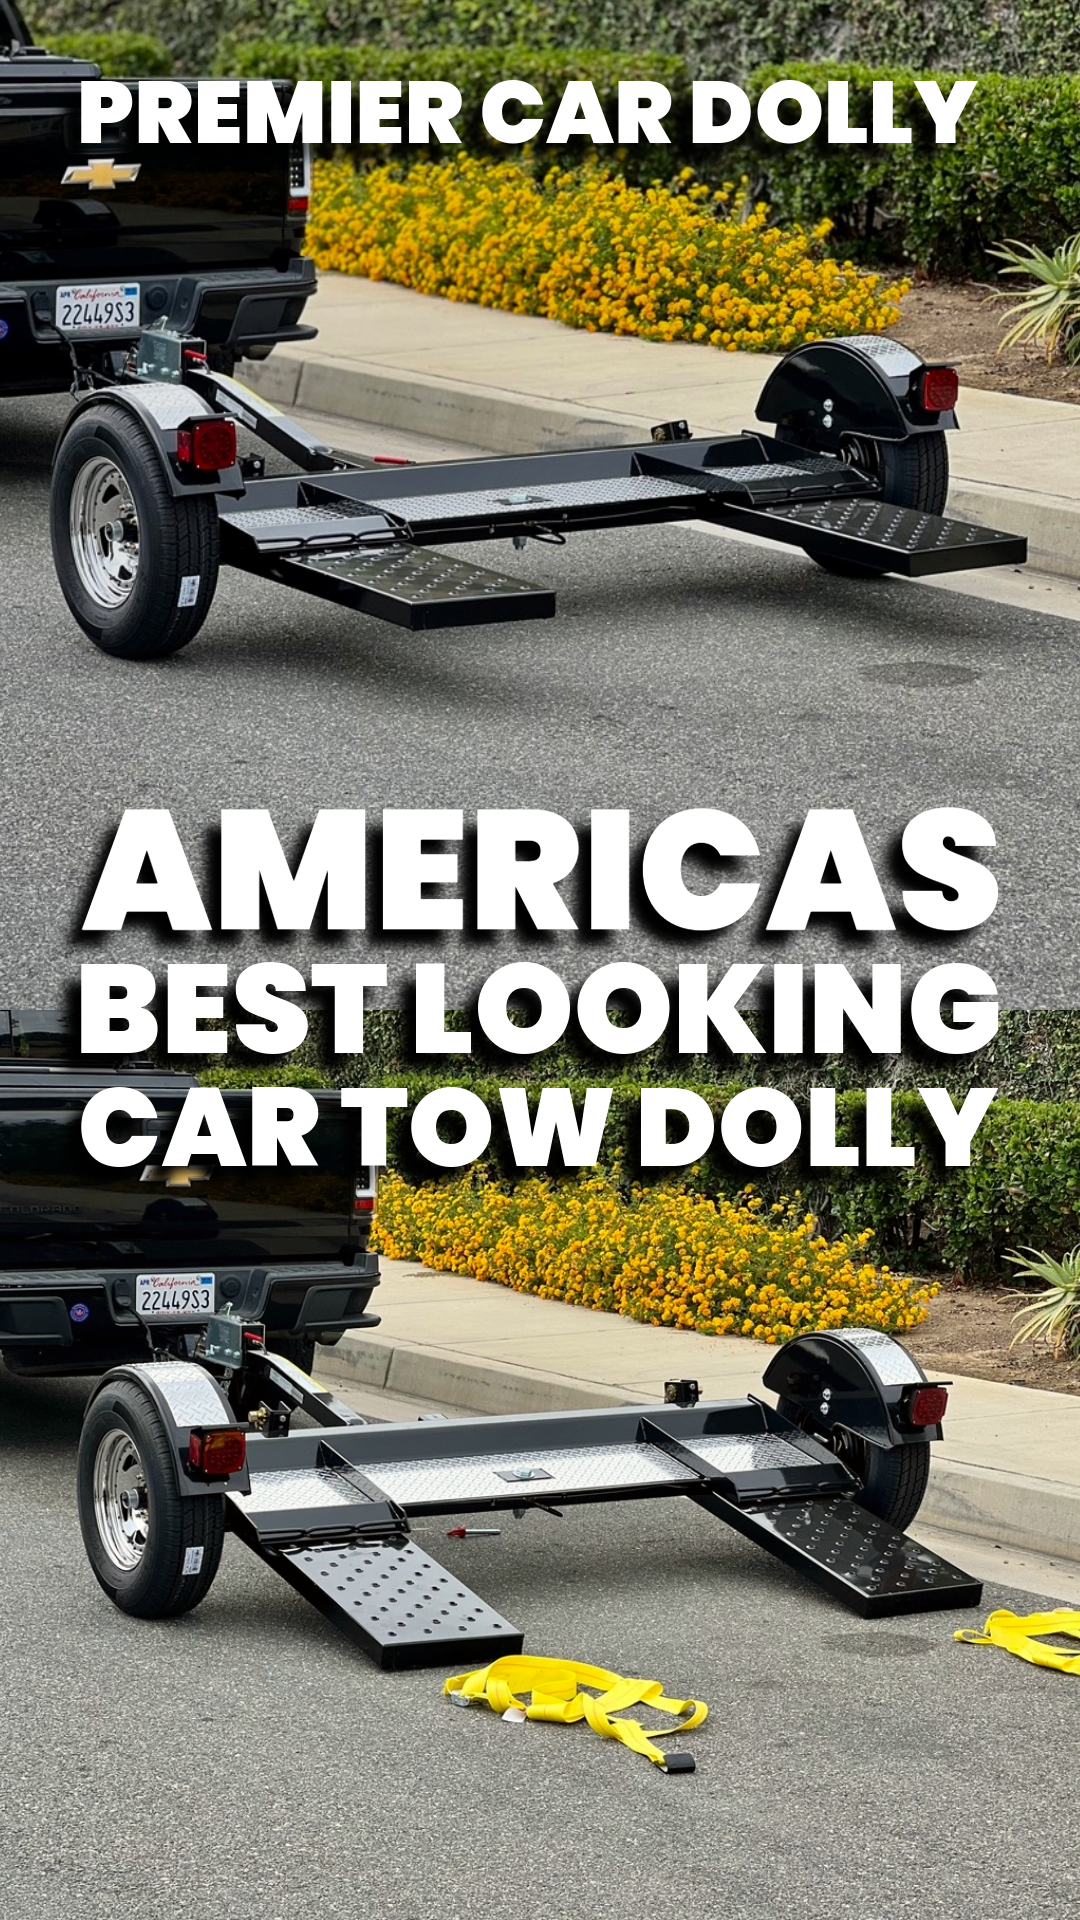 Auto Transport vs Tow Dolly: Which is the Best Option for Your